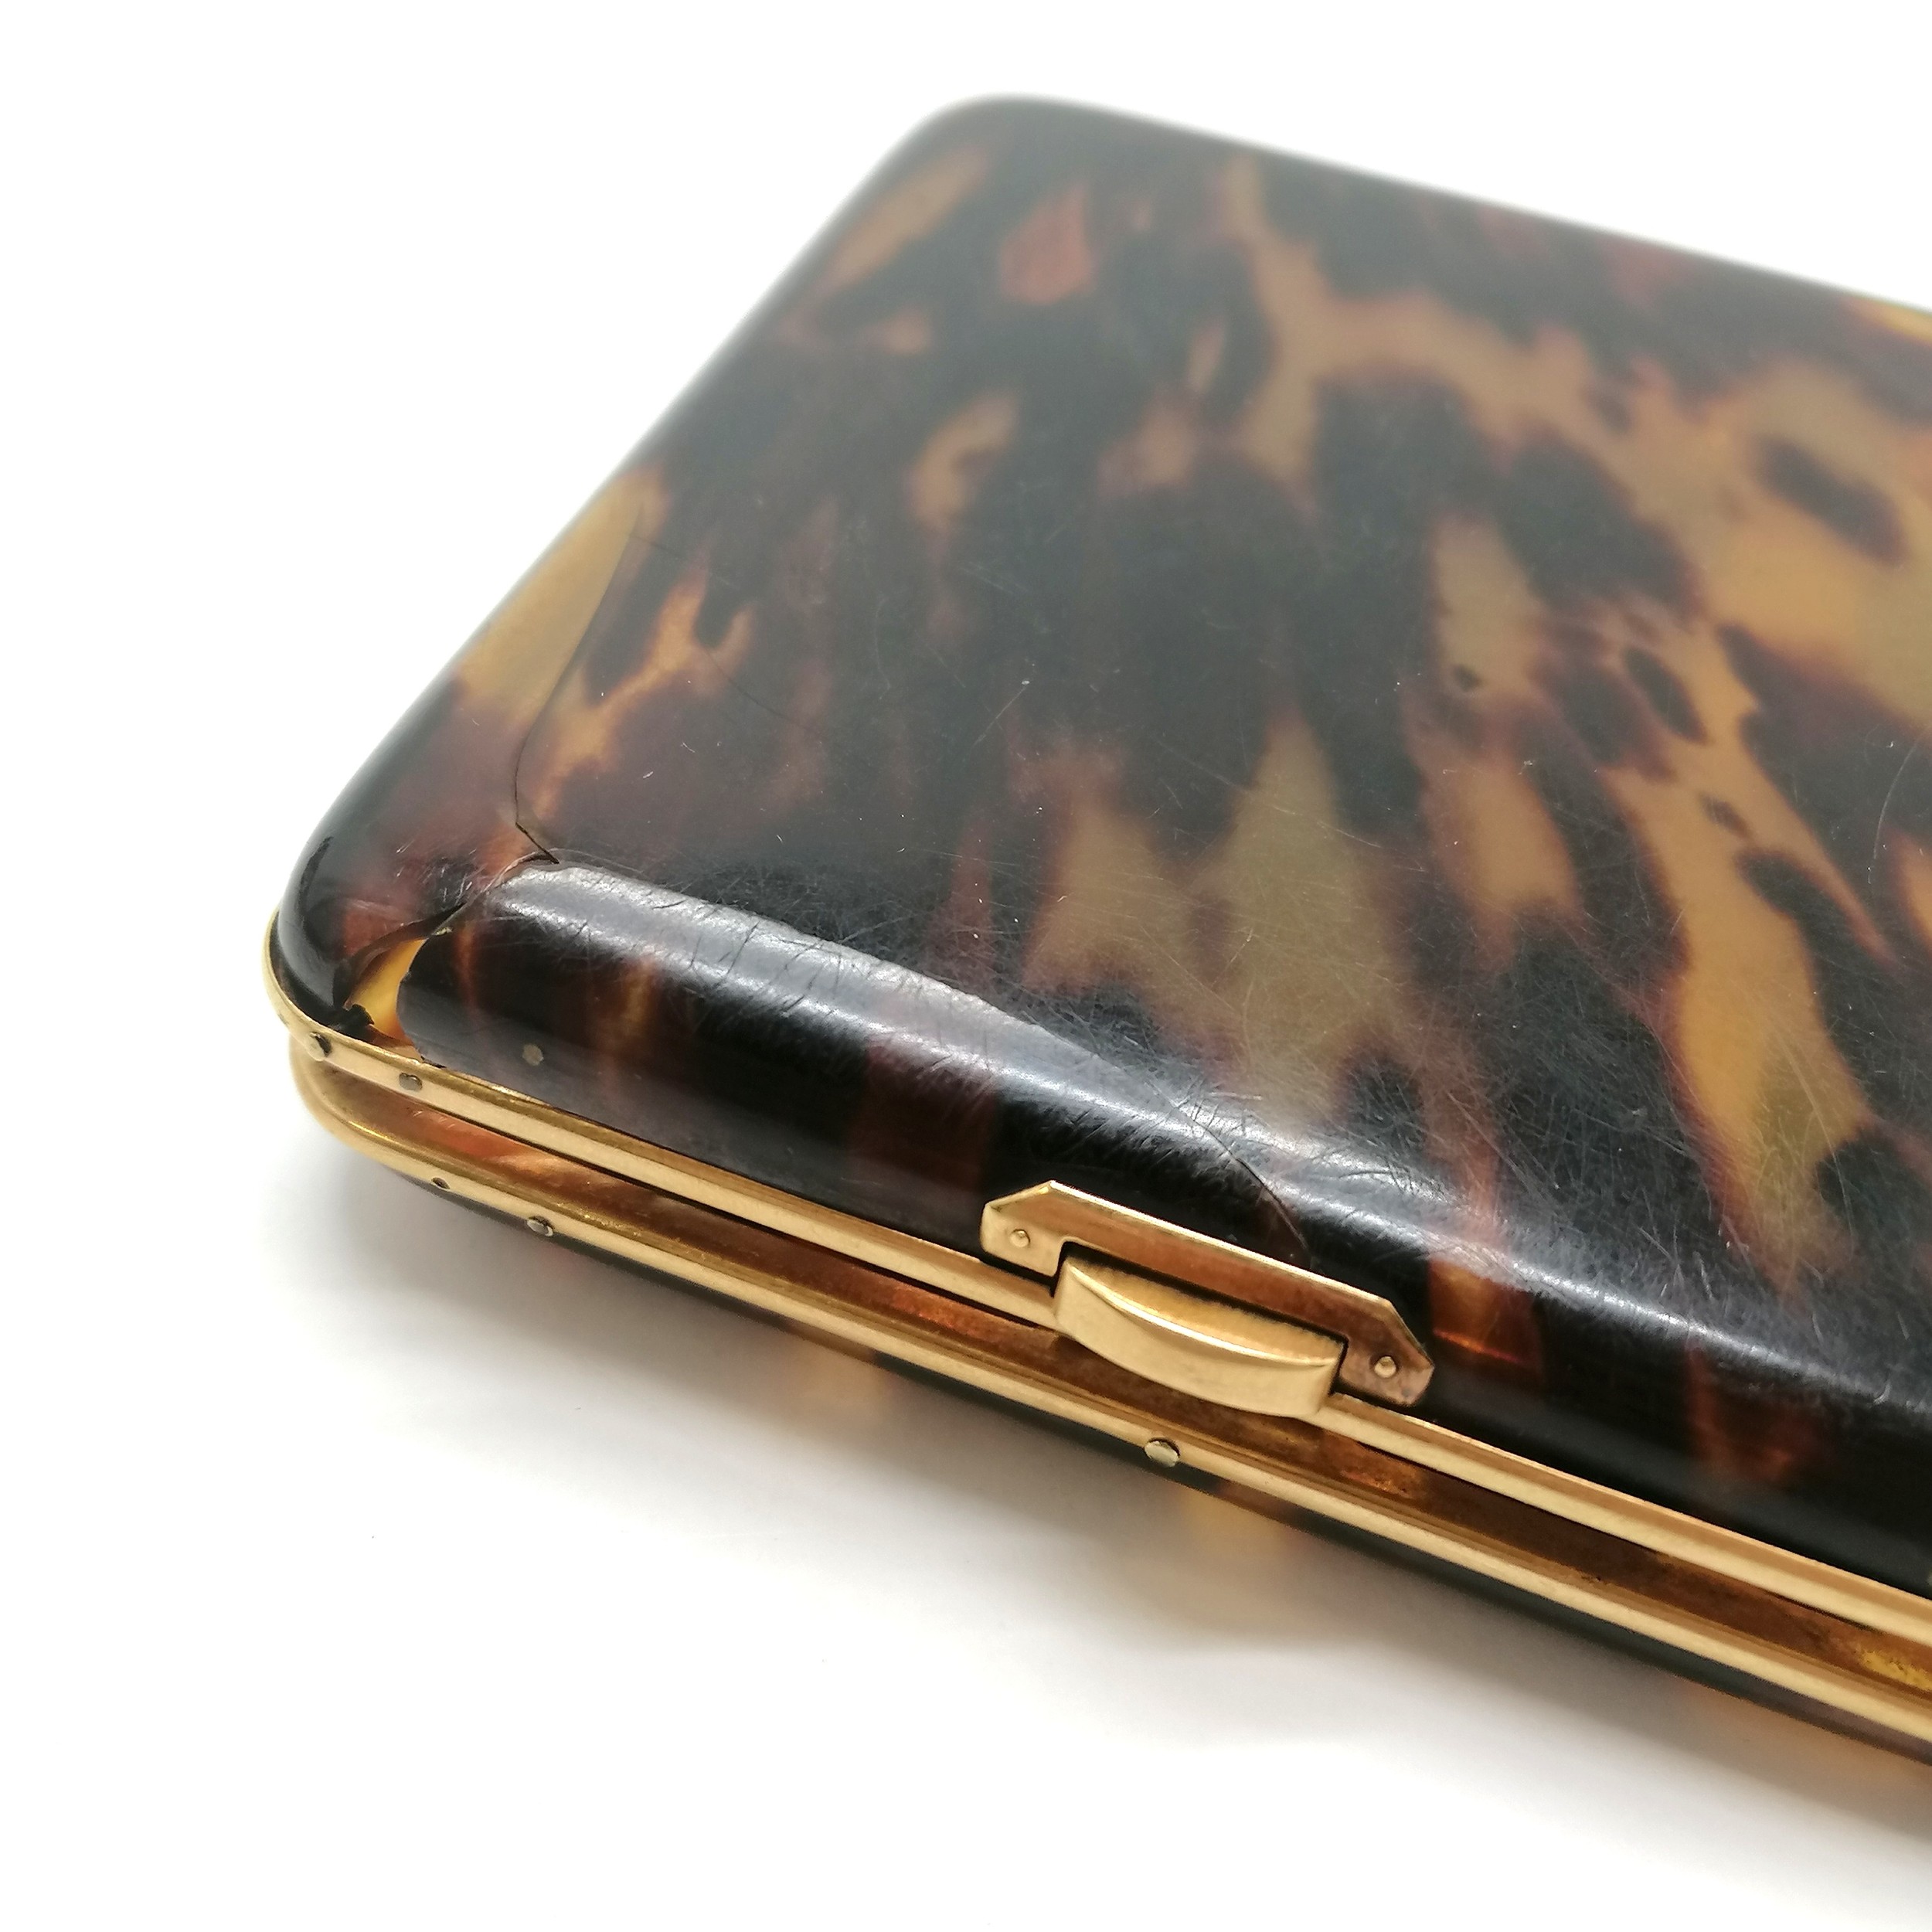 Antique 18ct marked gold mock tortoiseshell cigarette case (a/f to reverse with losses) with diamond - Image 2 of 3